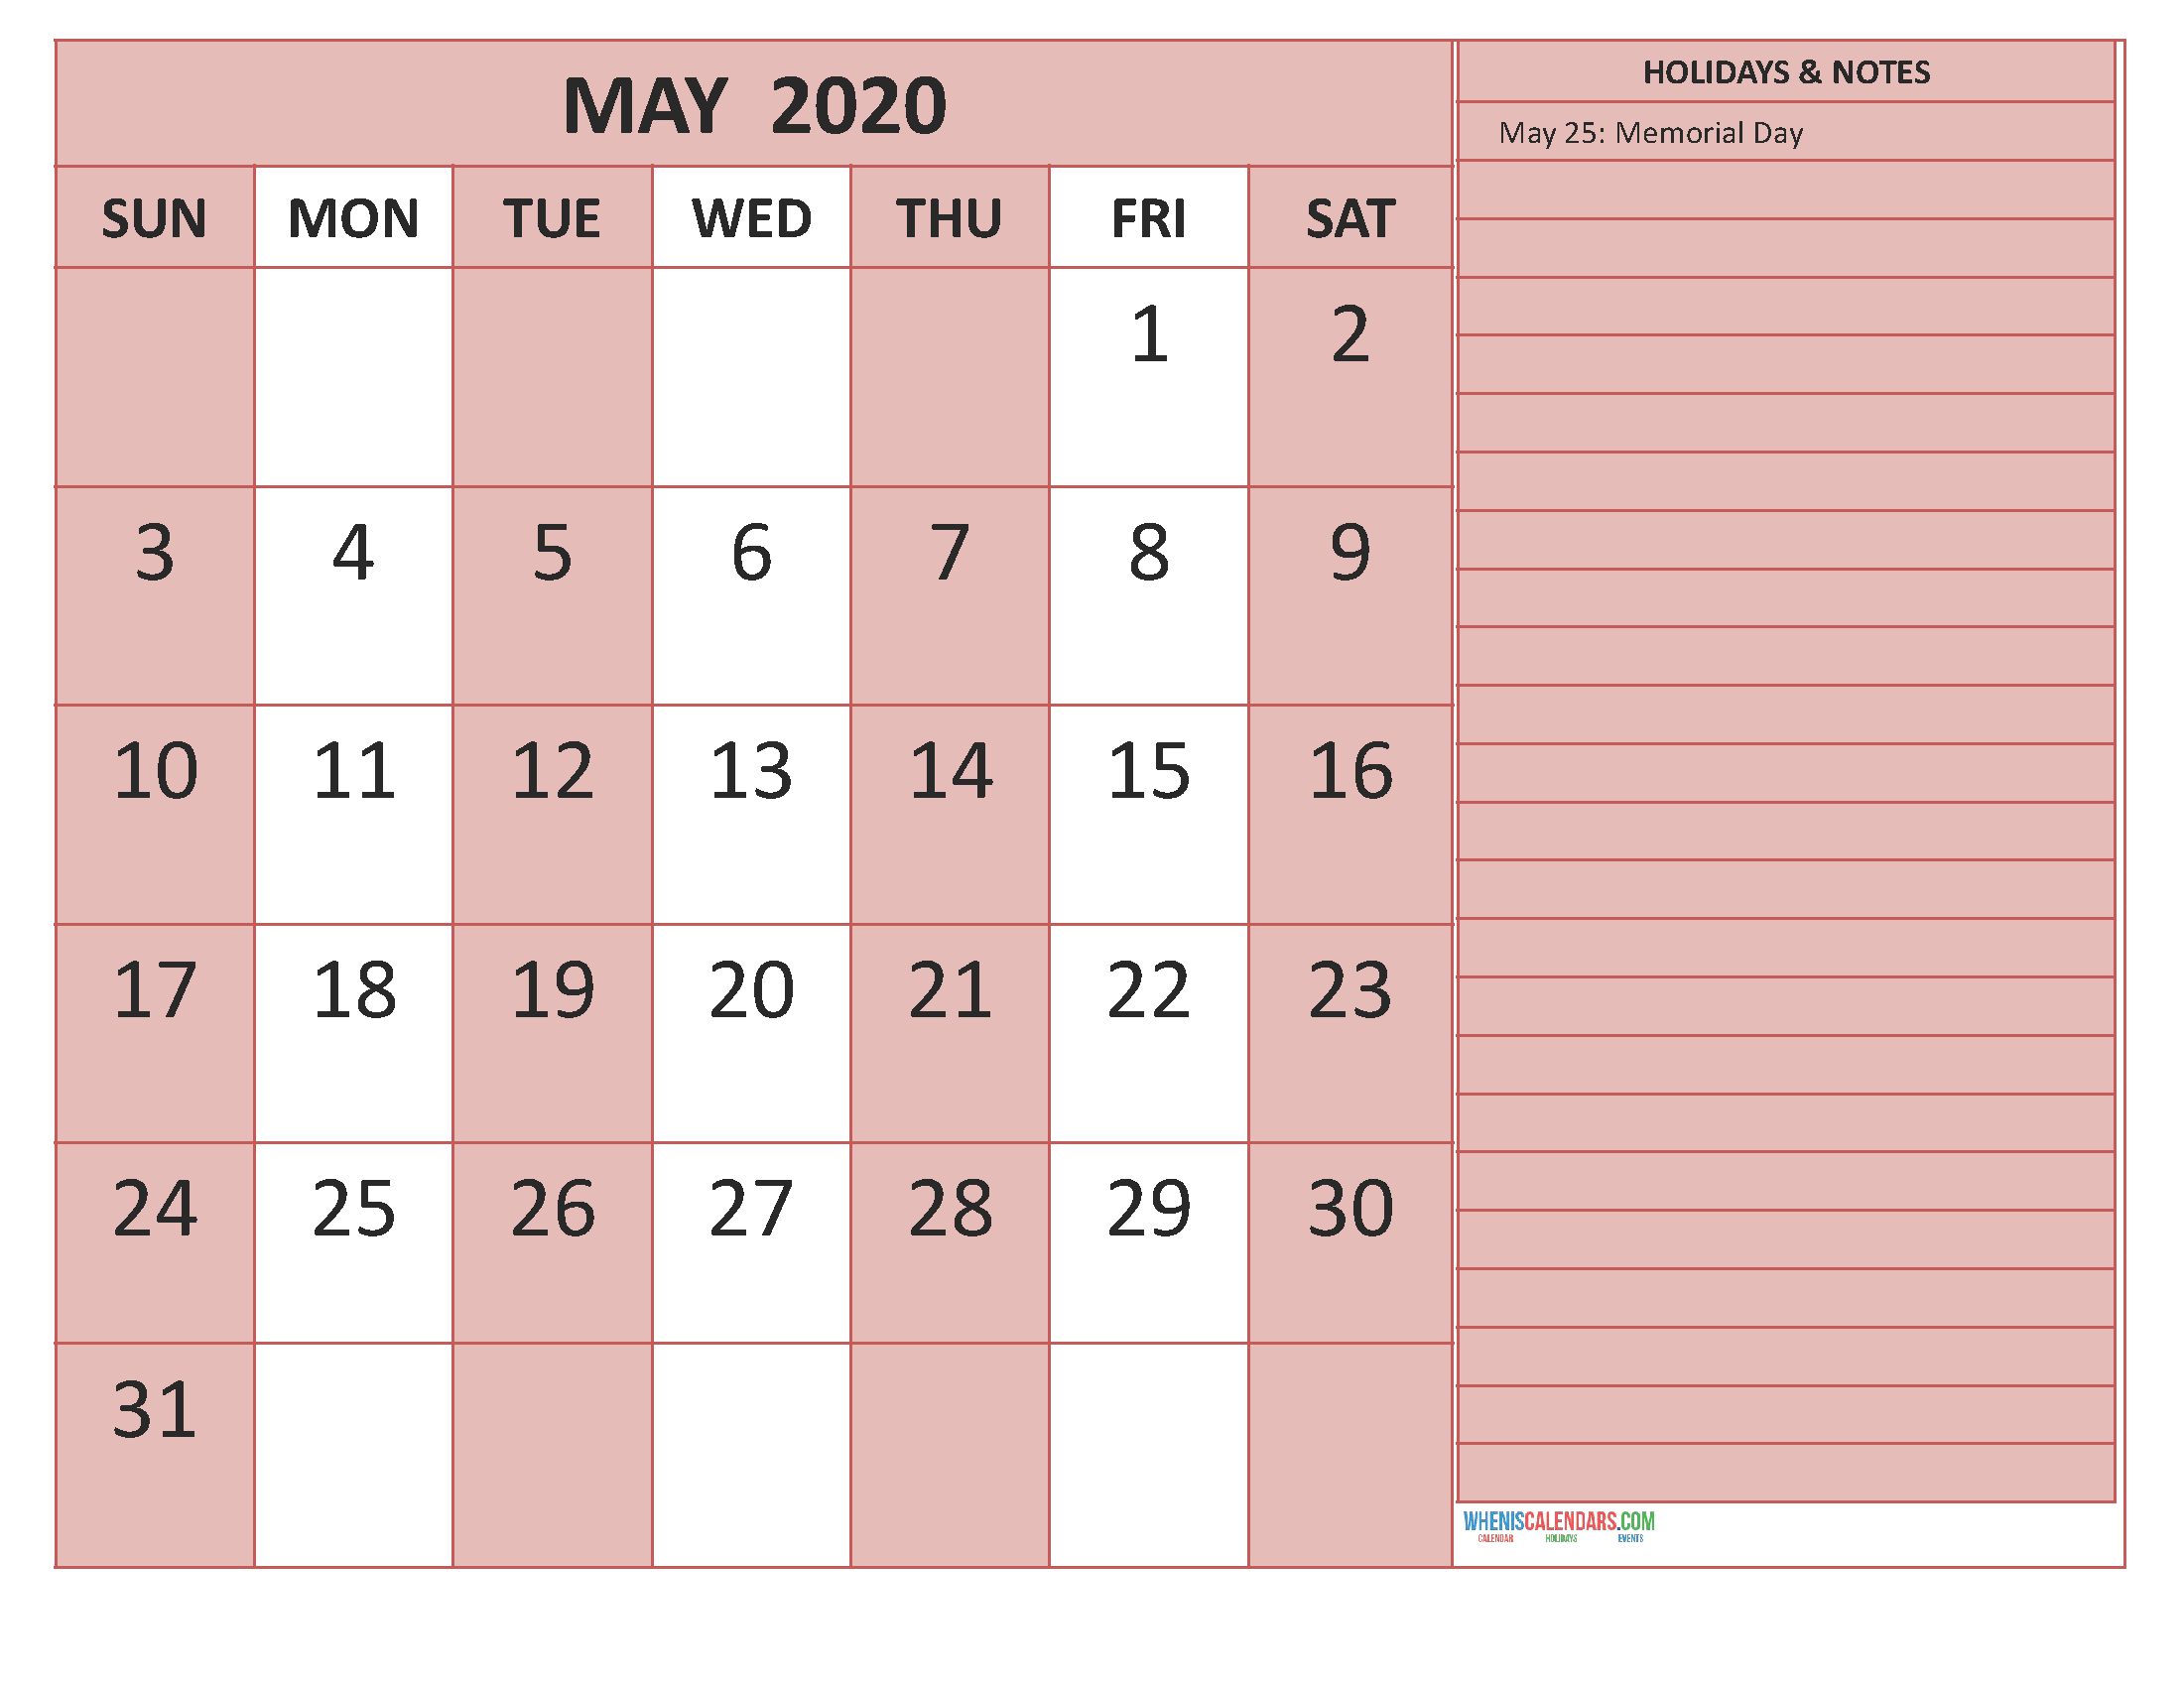 Monthly Schedule Template Word from www.wheniscalendars.com